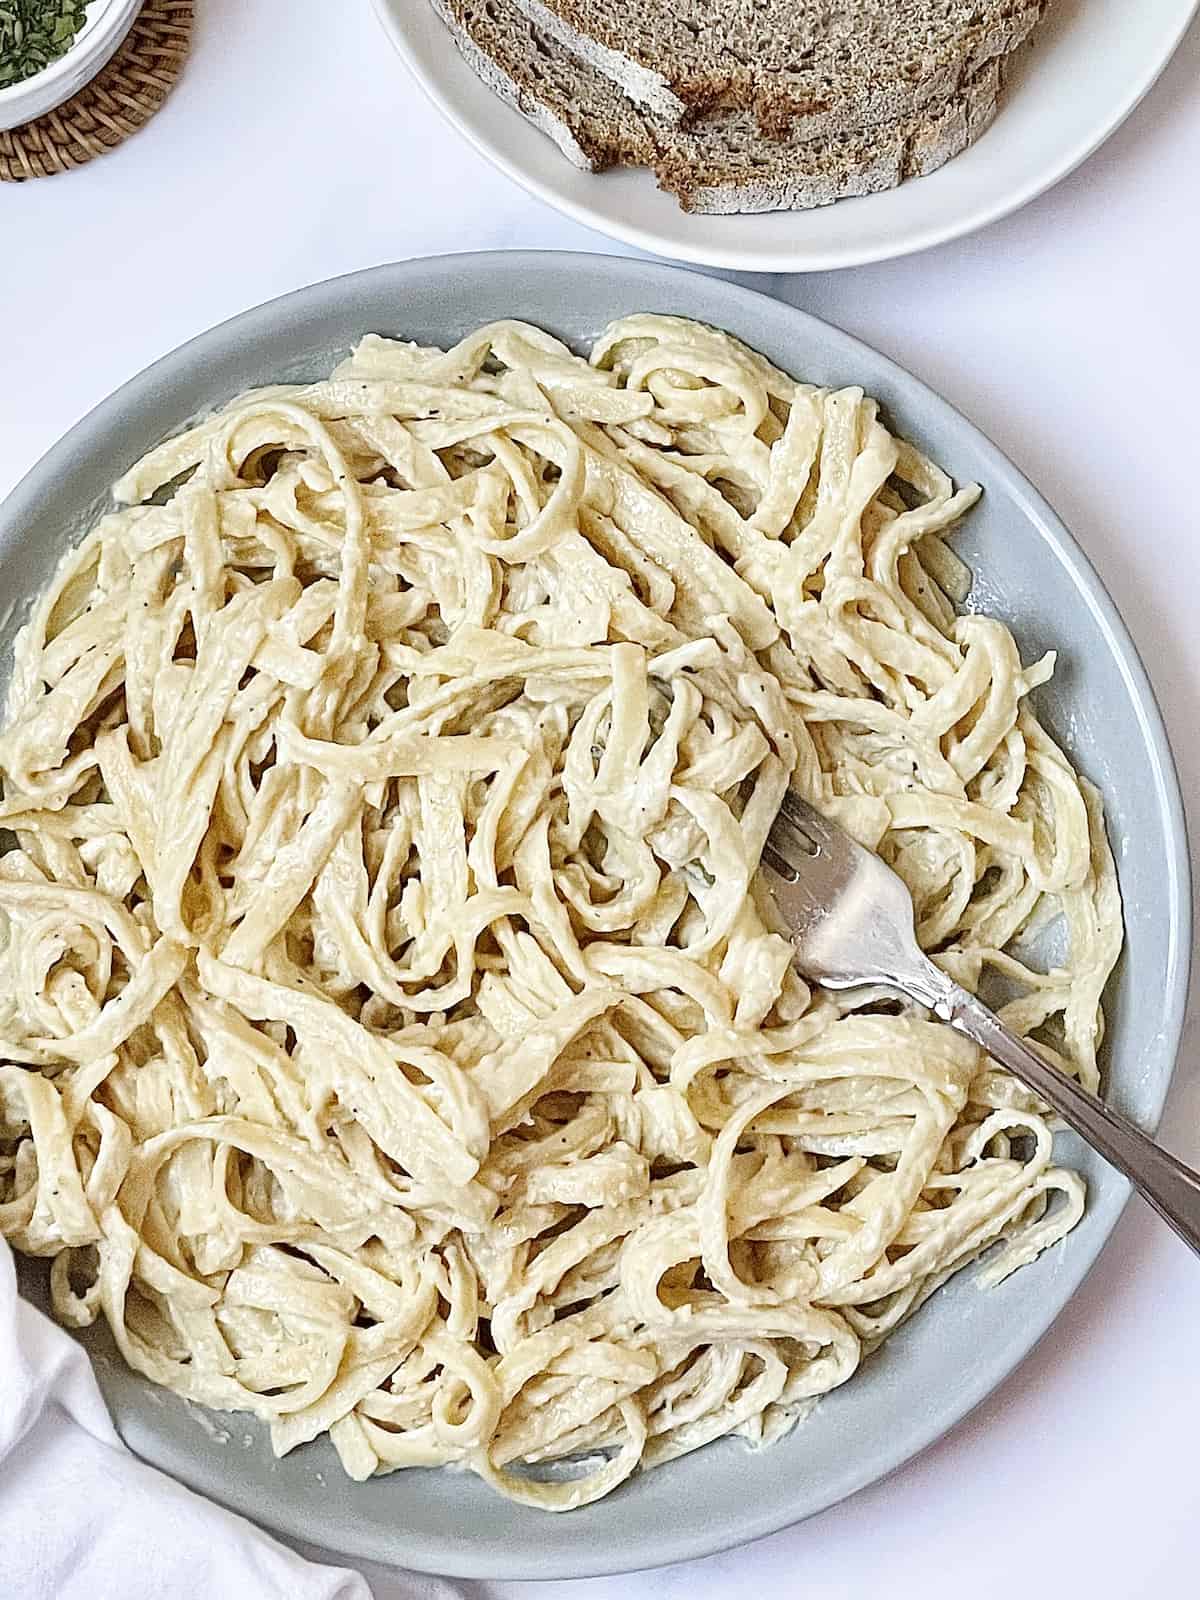 fettuccine alfredo in a bowl with cheese, bread, and herbs